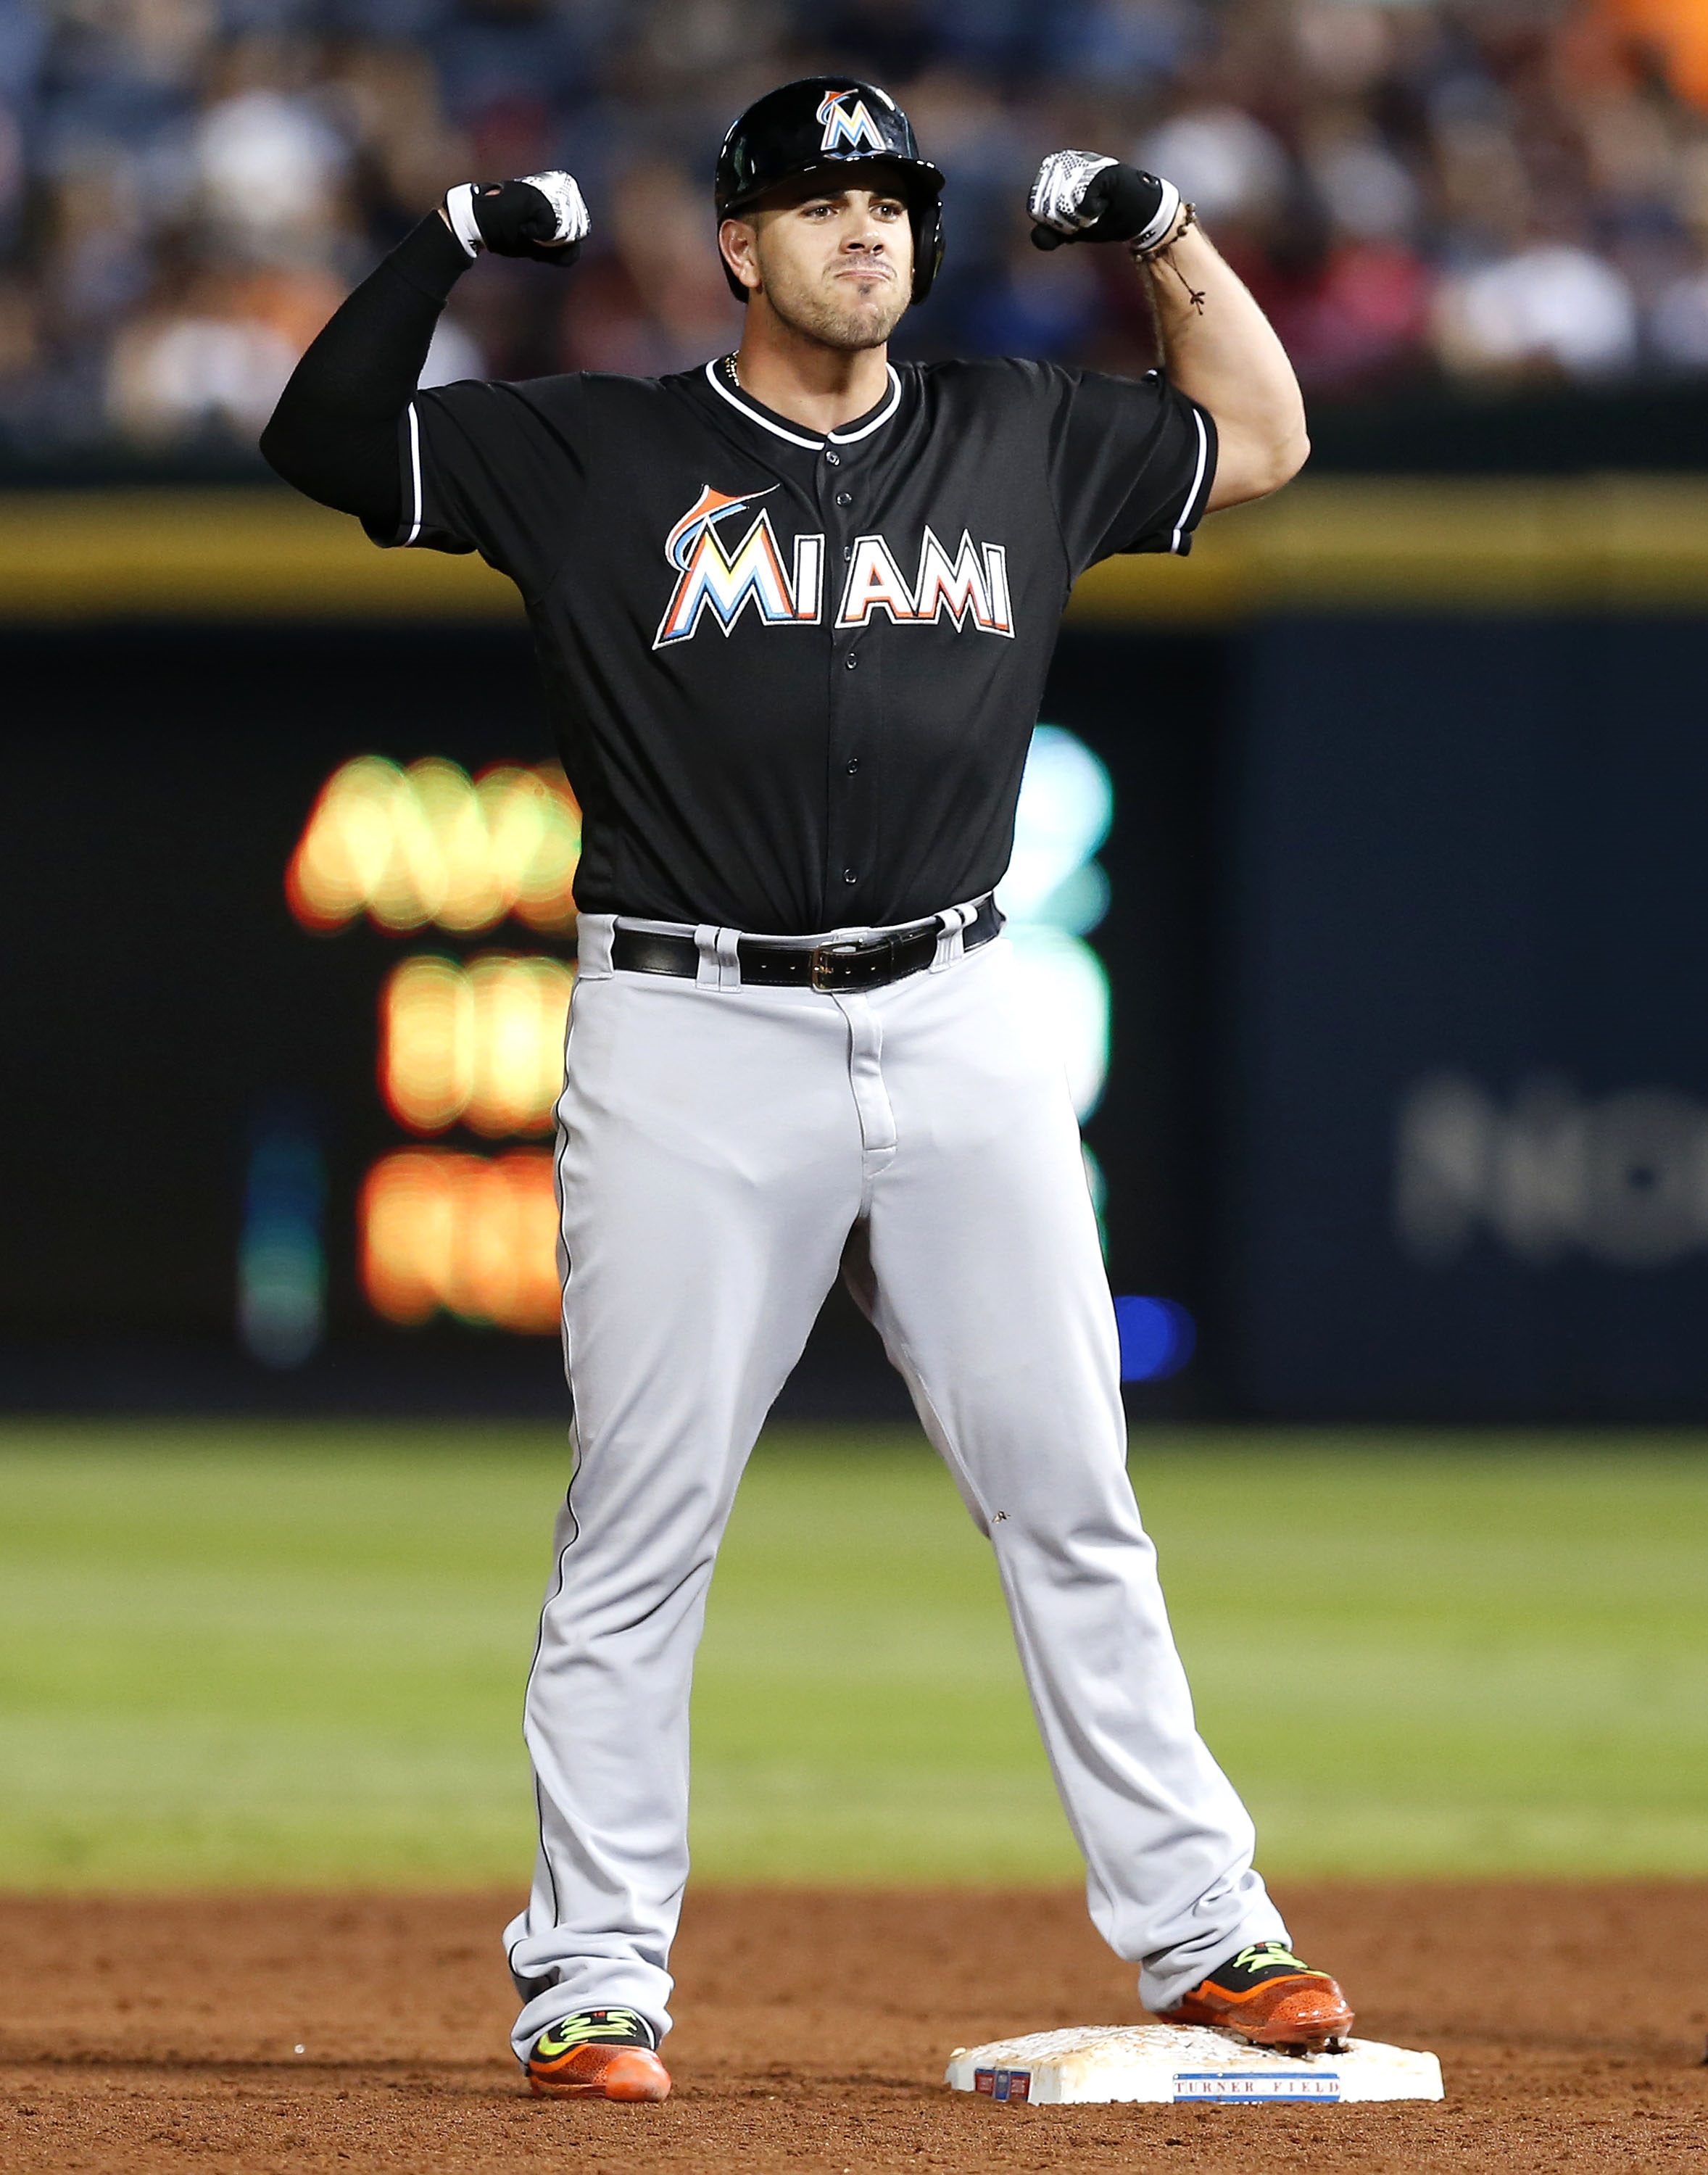 Fernandez to face hitters in next rehab hurdle